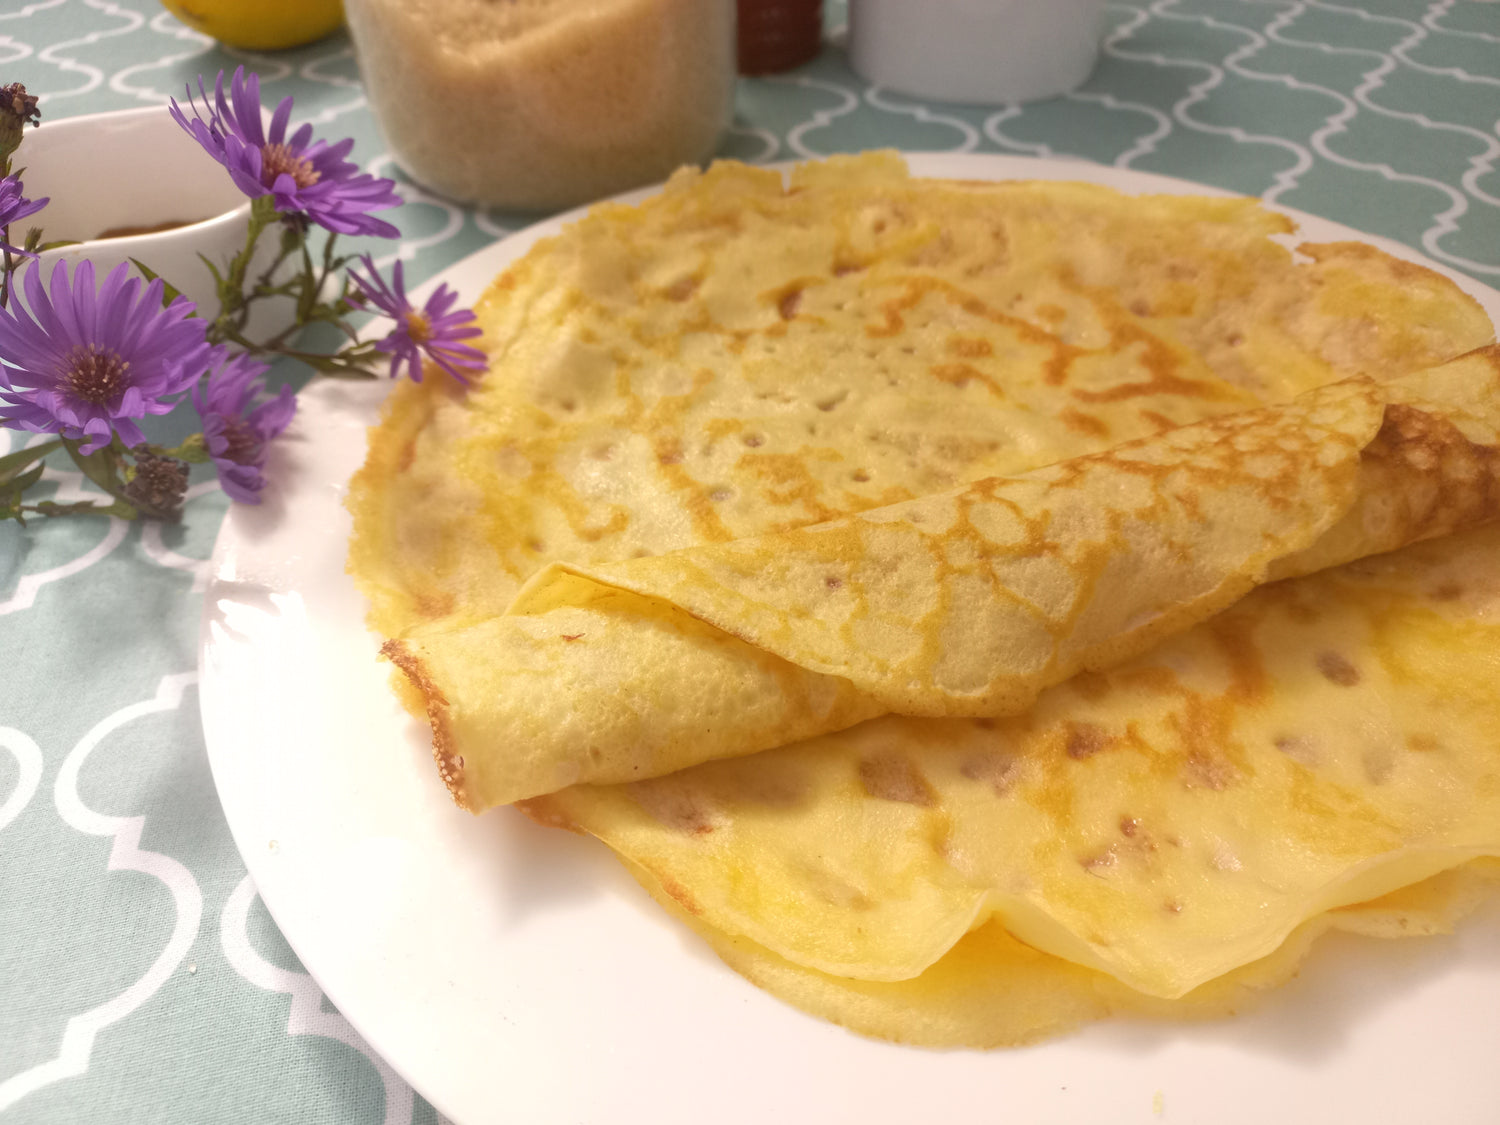 Pancakes (crêpes) made with Coleman Royal Bakeries Gluten-free Plain Flour.  Recipe available.